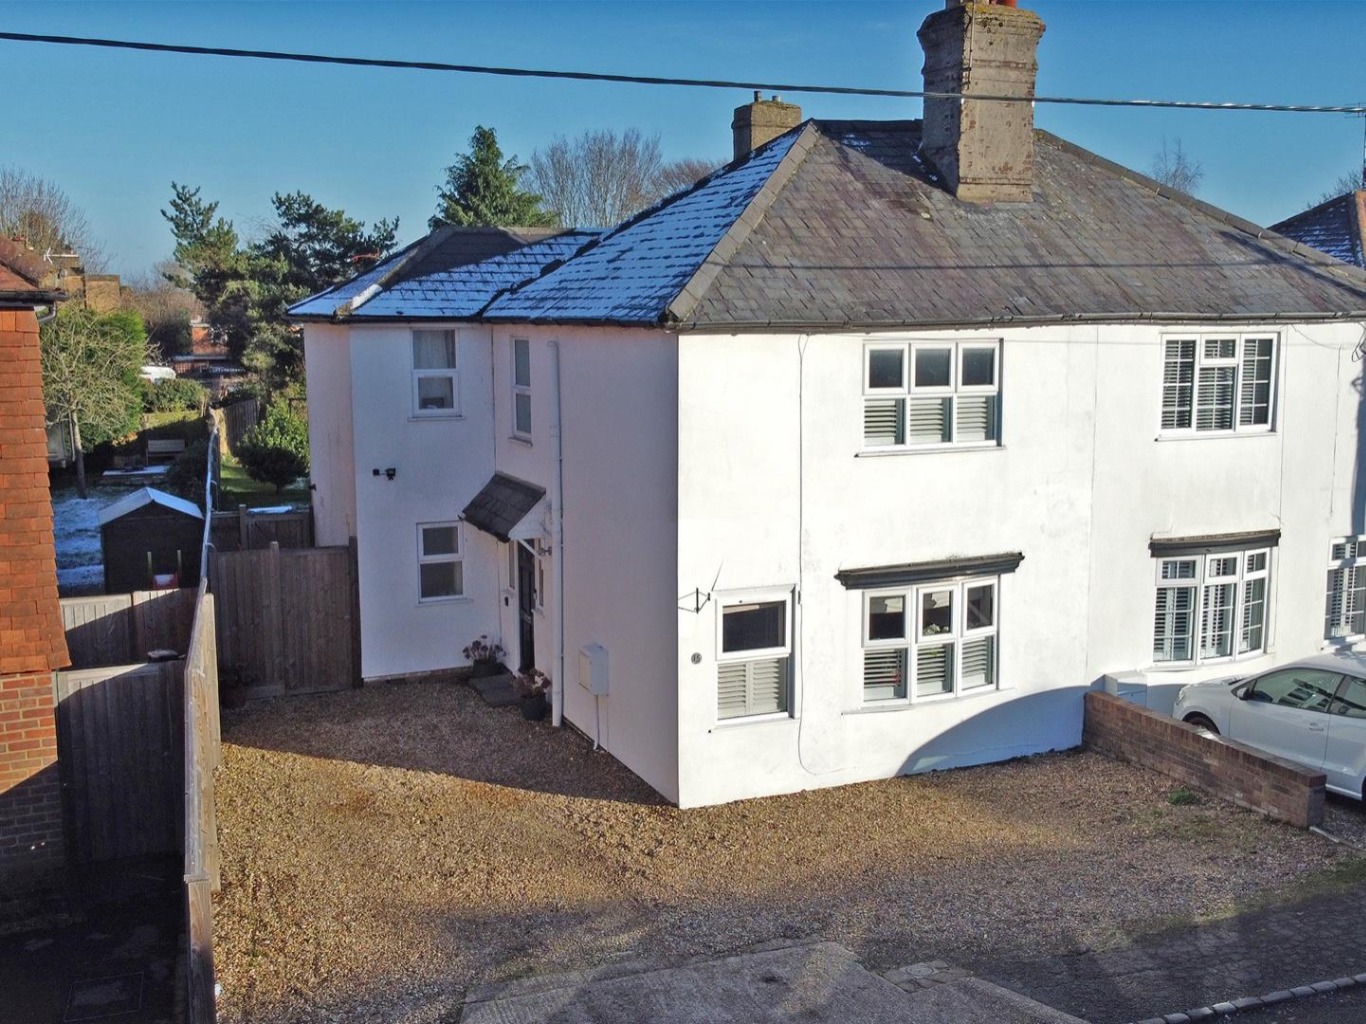 **Check out the property video** Viewings on Saturday 9th April.  A lovely semi detached cottage that sits in the heart of Holmer Green village. Originally built in 1901 the home has been extended and offer driveway parking and a large rear garden.